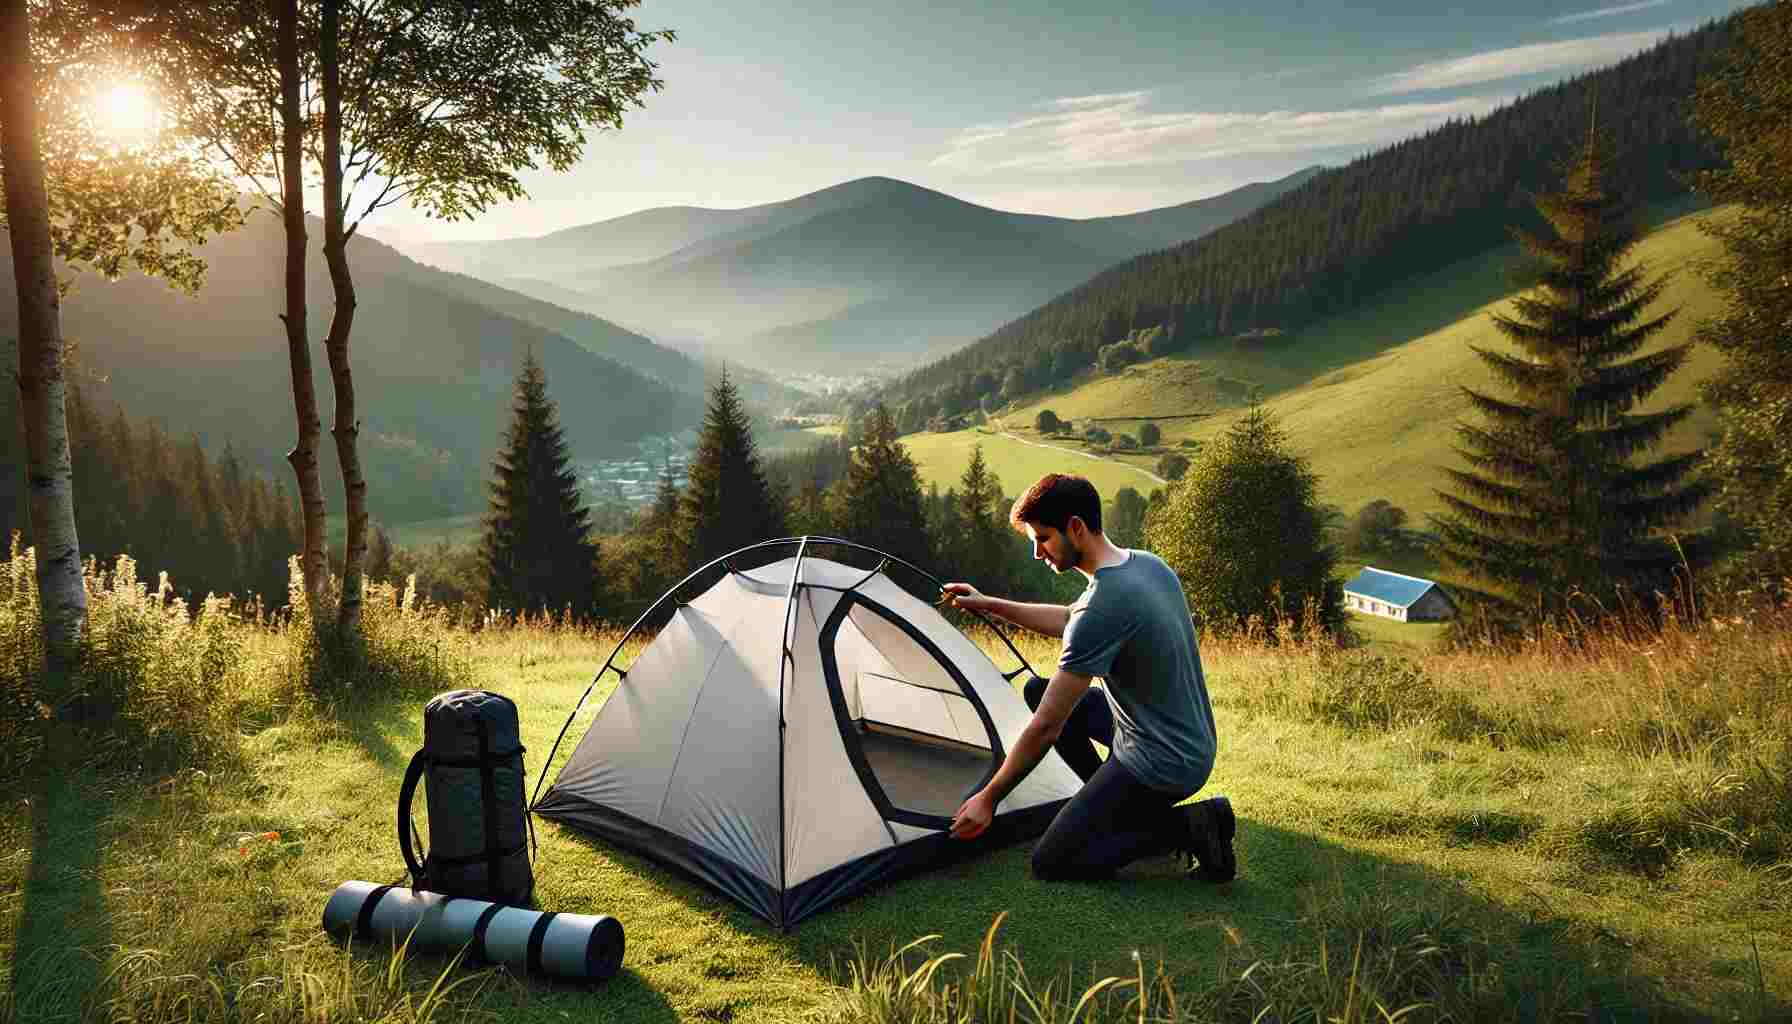 A solo hiker setting up a lightweight, compact tent in a scenic outdoor location with lush greenery, mountains in the background, and a clear blue sky.